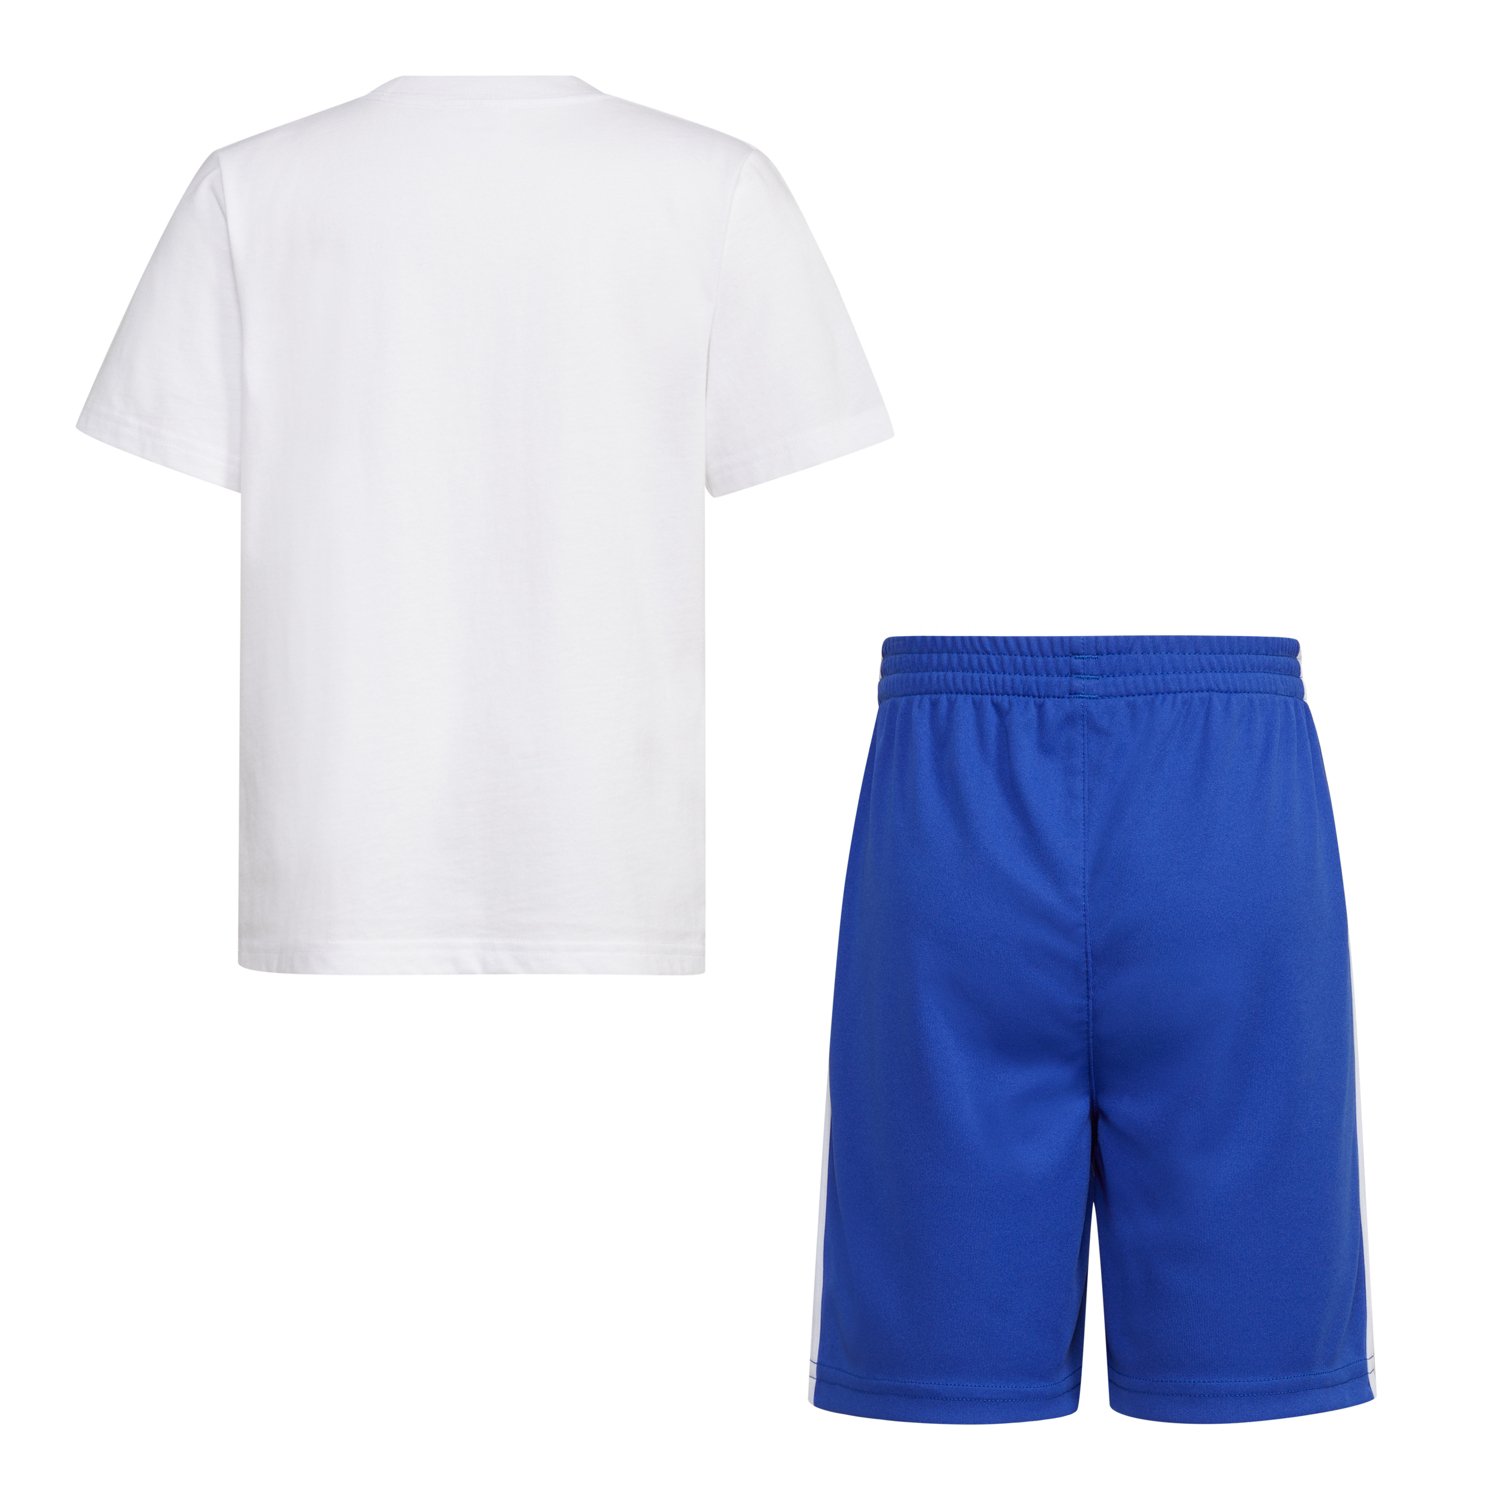 adidas 2-Piece Cotton and Graphic Set Shorts | Academy T-shirt